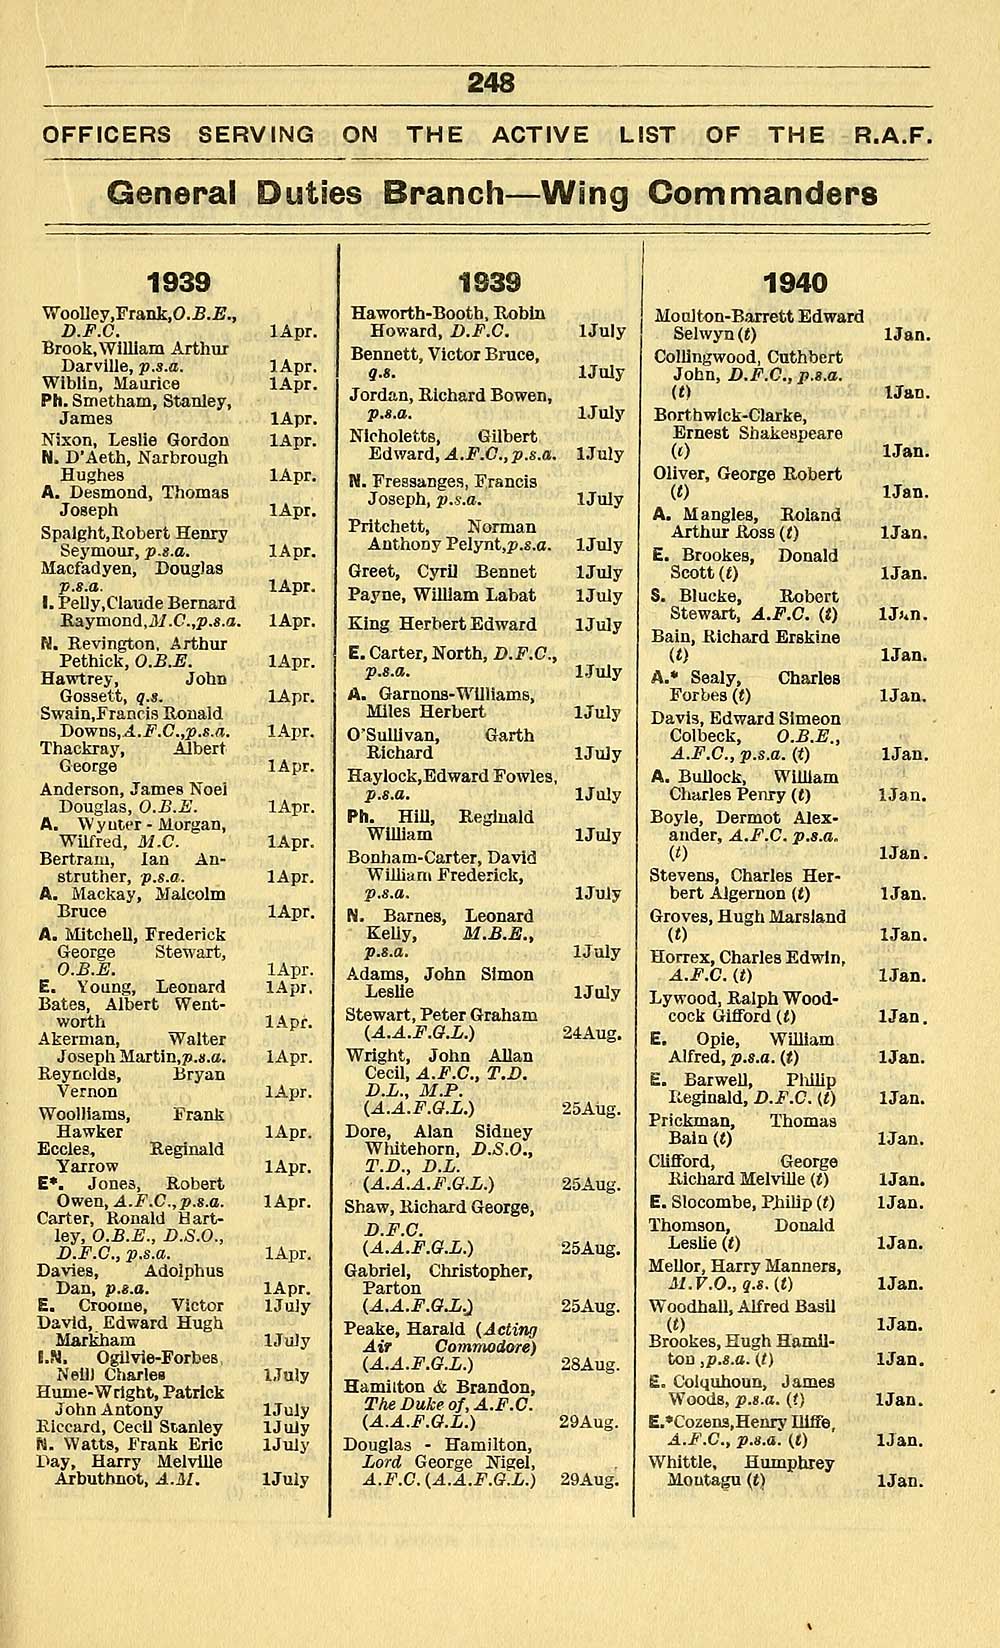 107 Air Force Lists Air Force List Bimonthly 1941 January